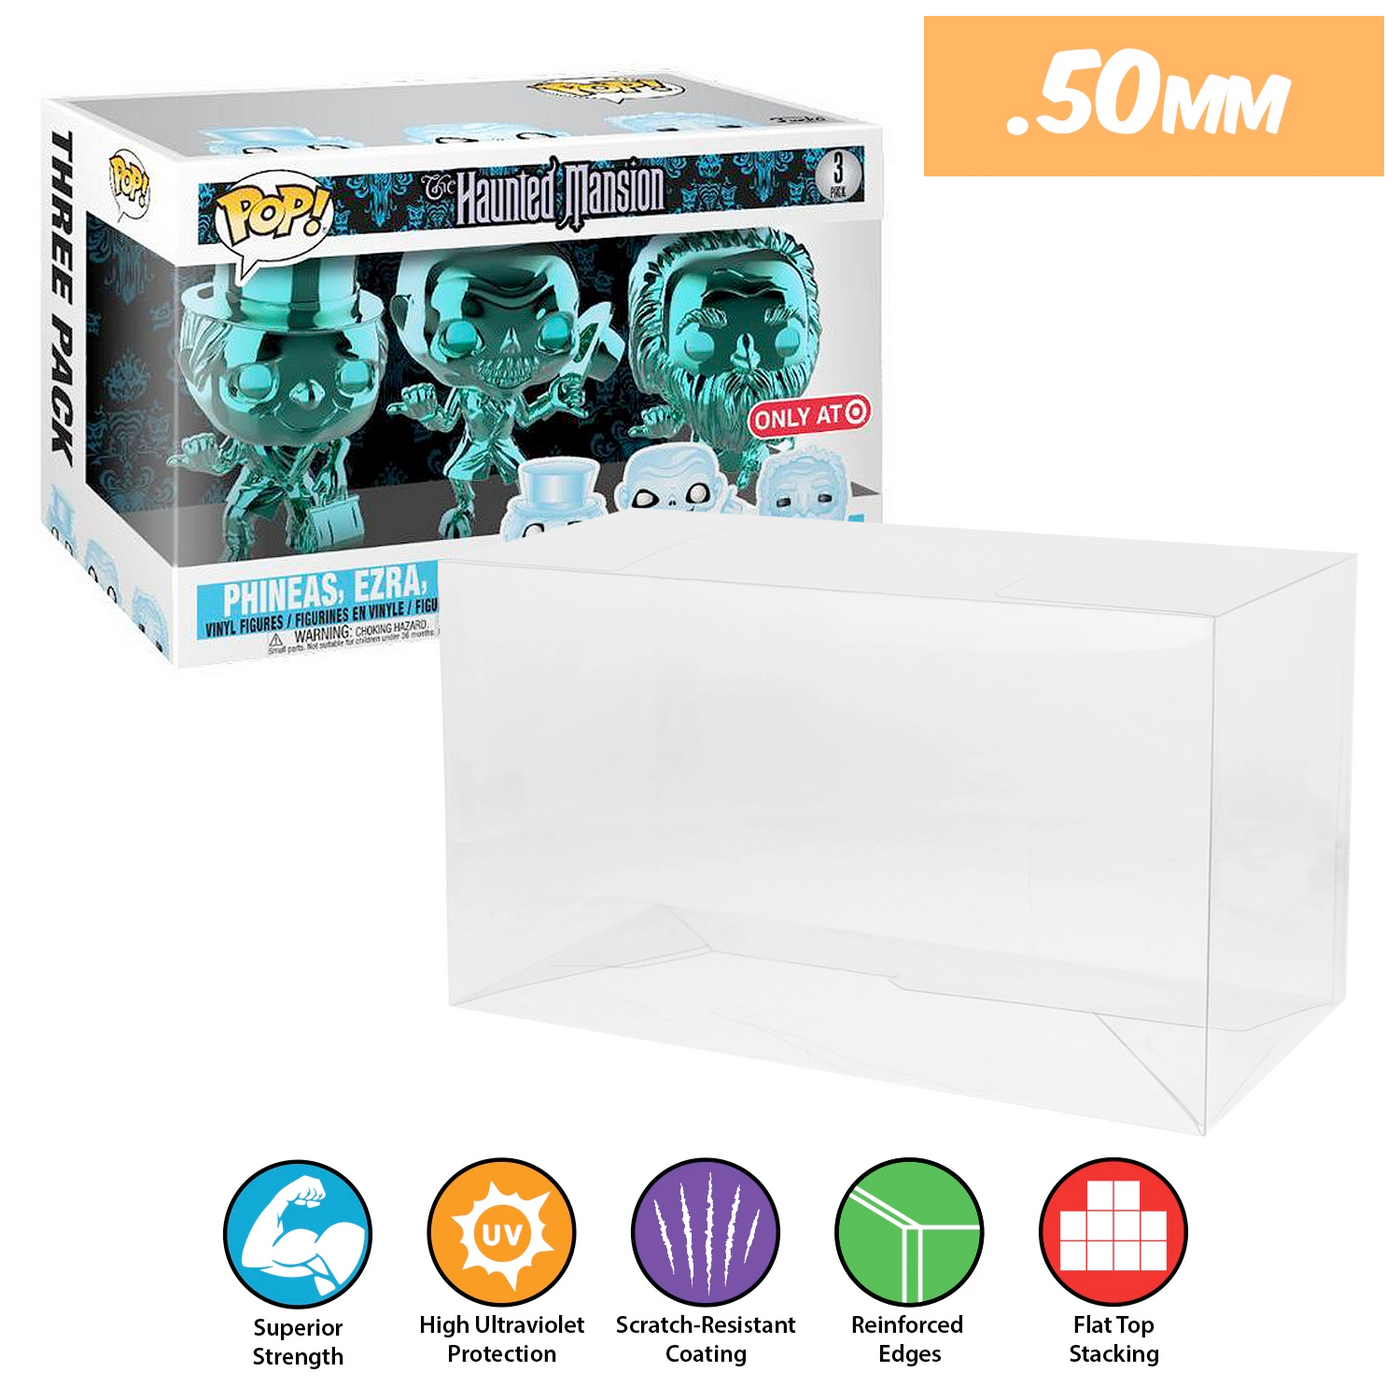 haunted mansion chrome 3 pack best funko pop protectors thick strong uv scratch flat top stack vinyl display geek plastic shield vaulted eco armor fits collect protect display case kollector protector